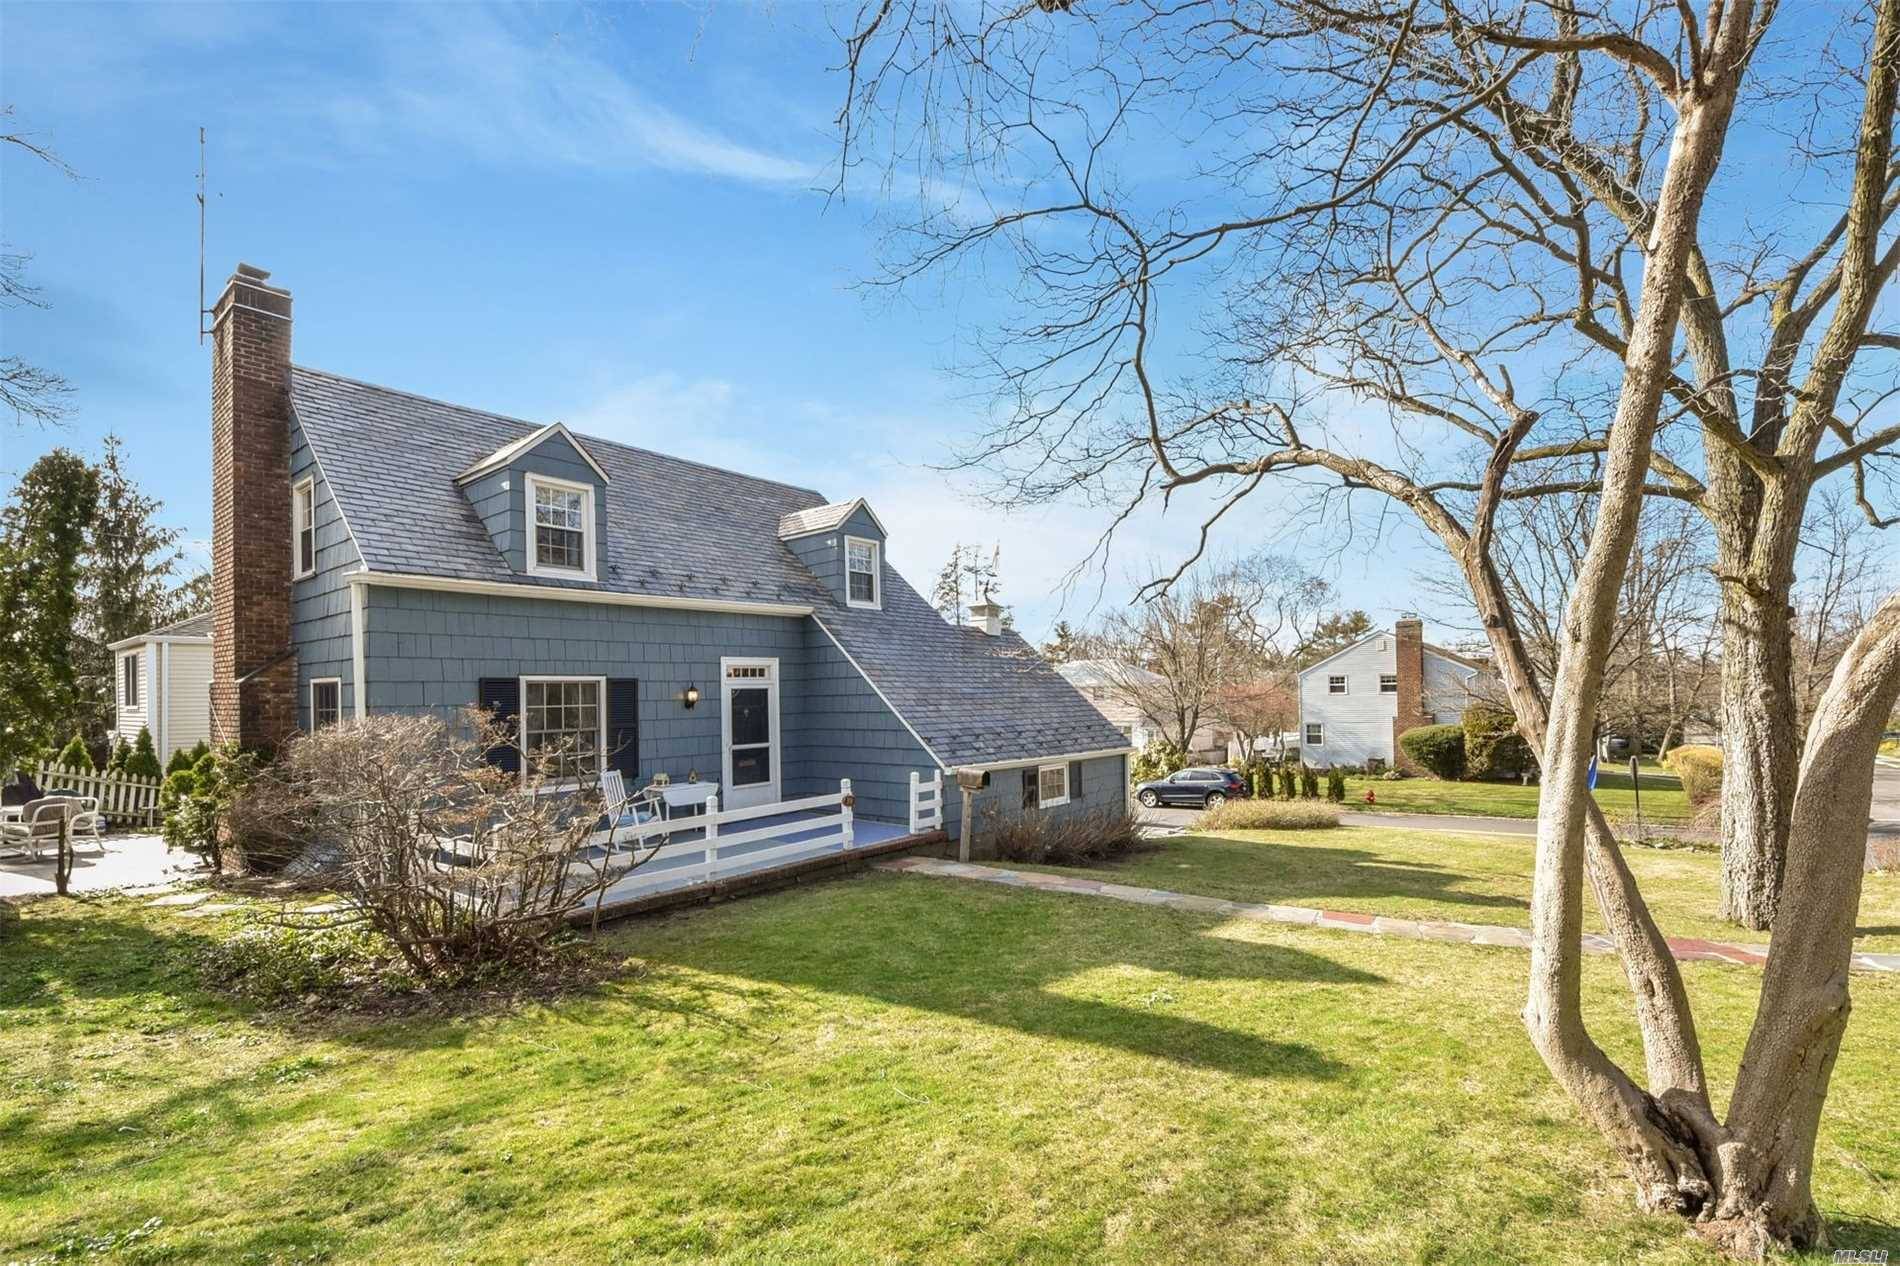 Charming New Salem Saltbox Colonial With Slate Roof.